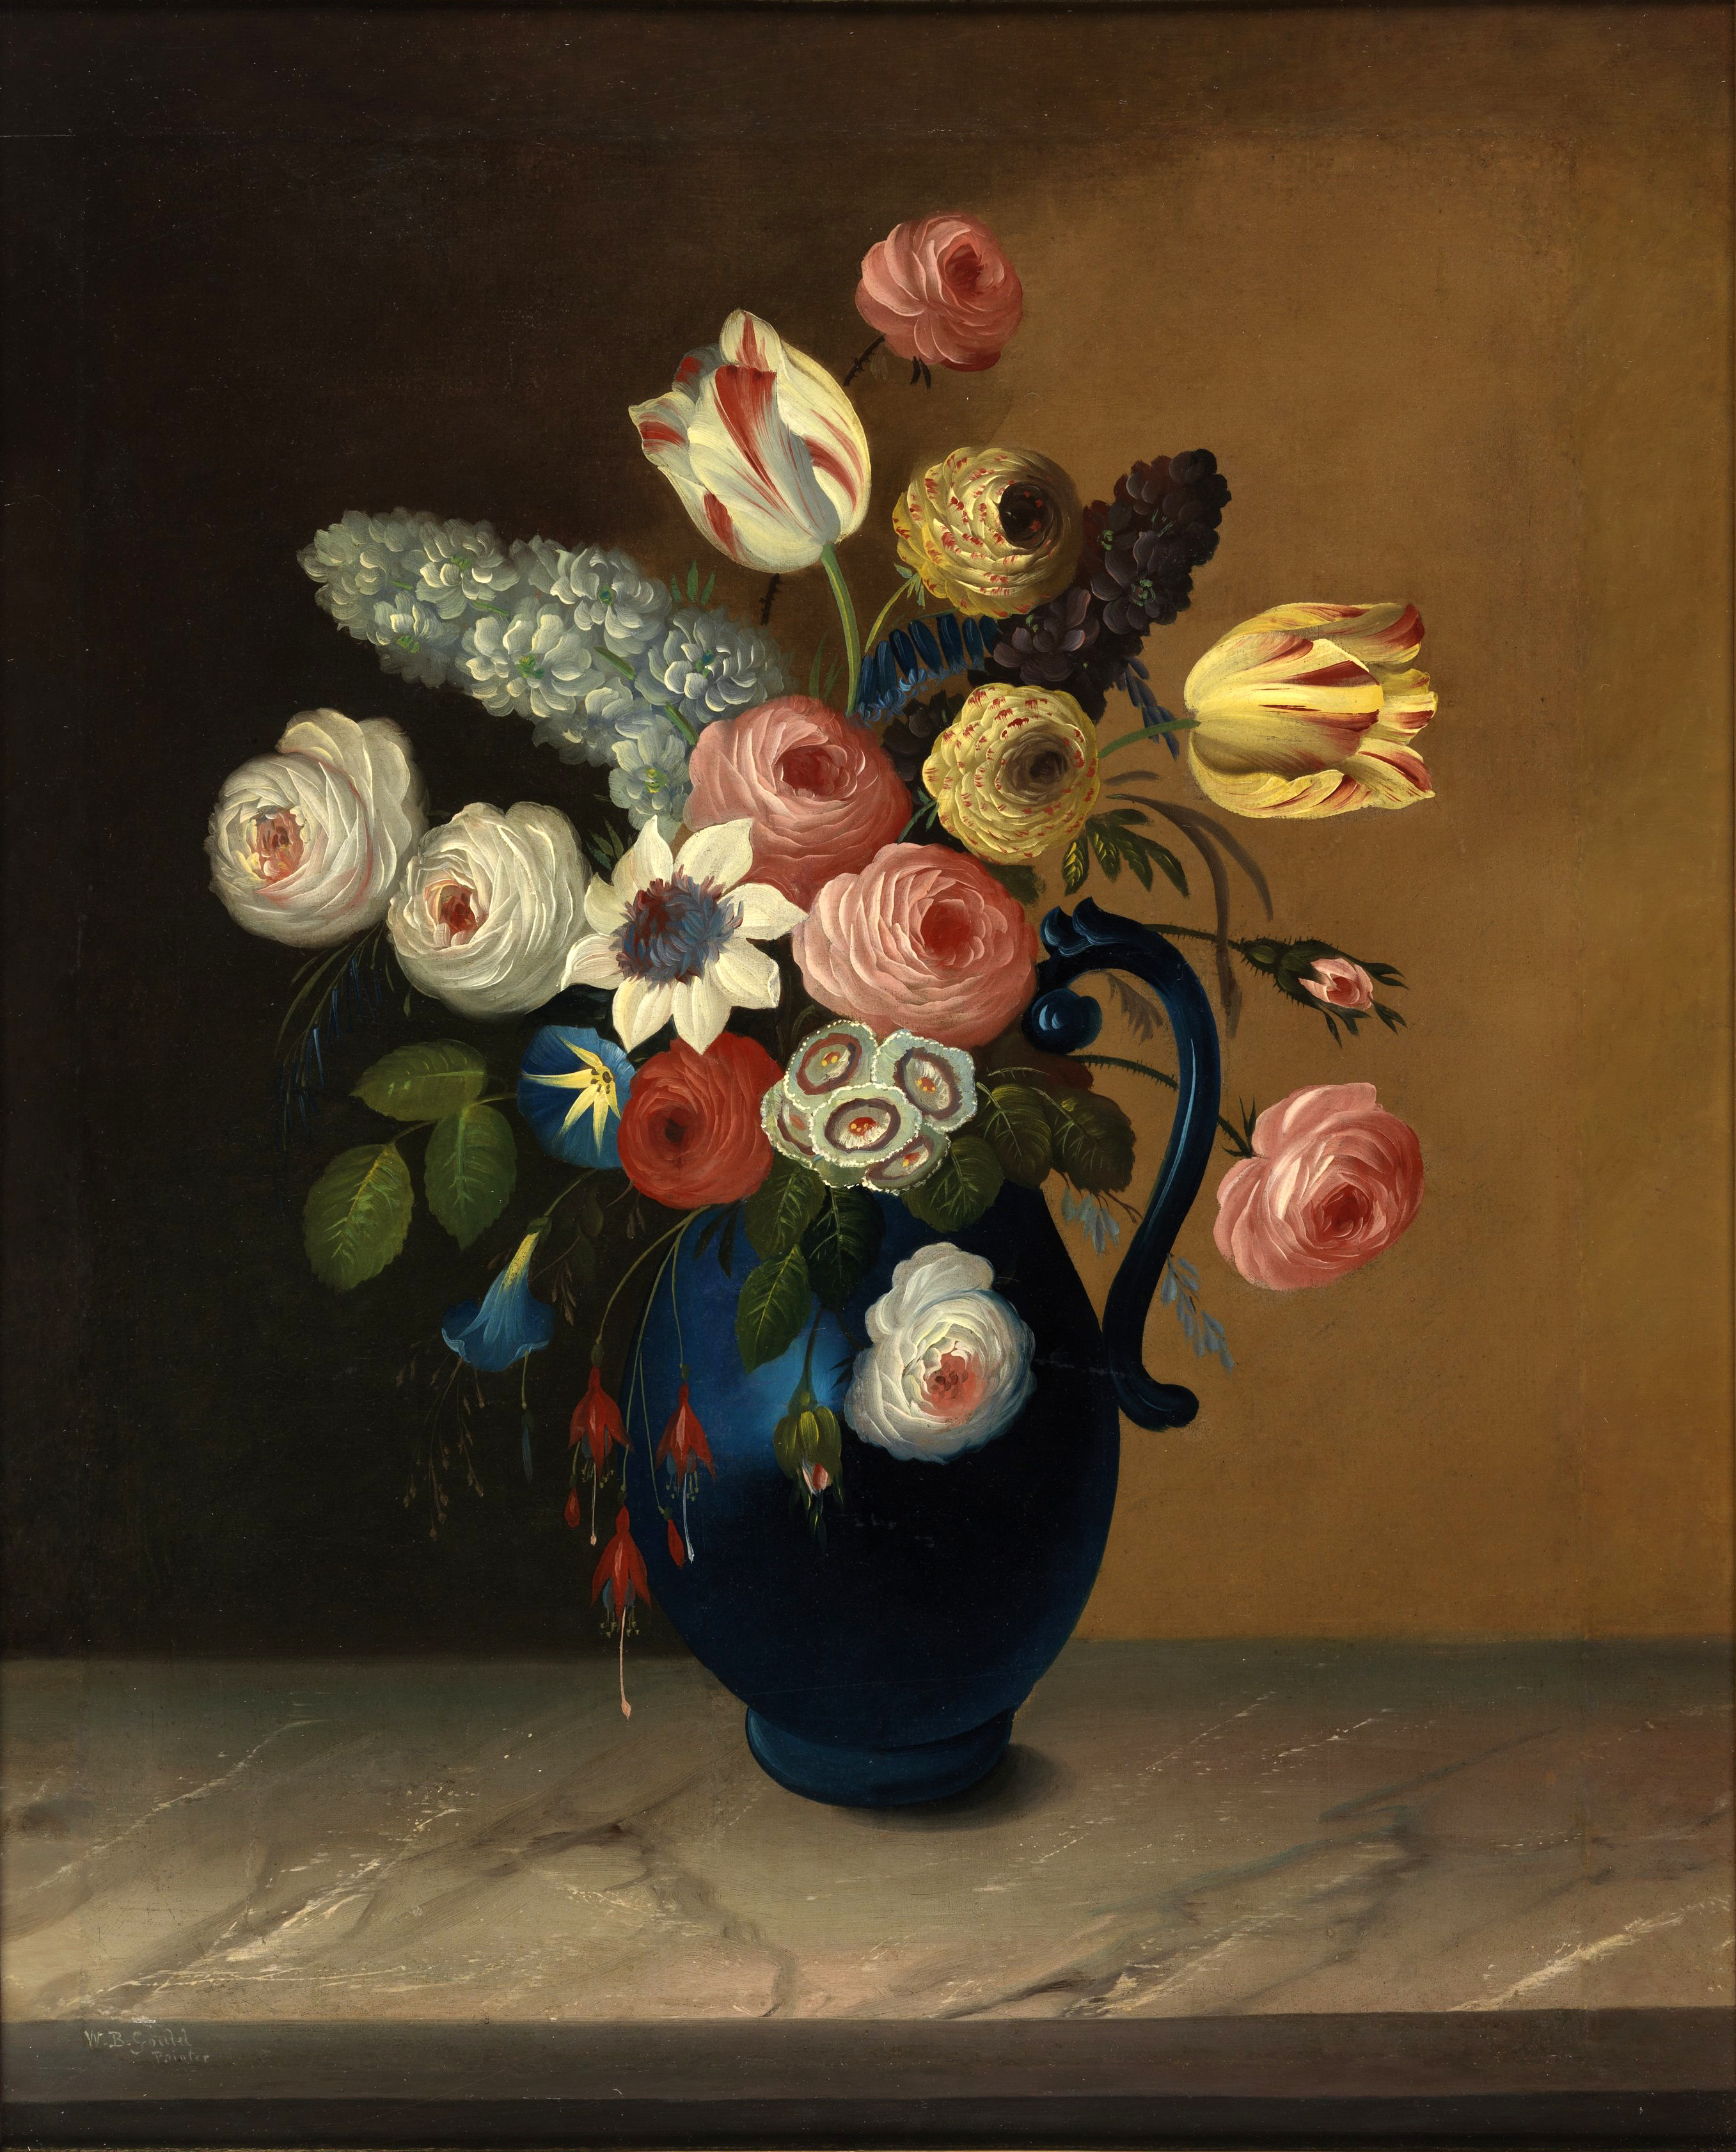 Still life, flowers in a blue jug - William Buelow Gould c1840